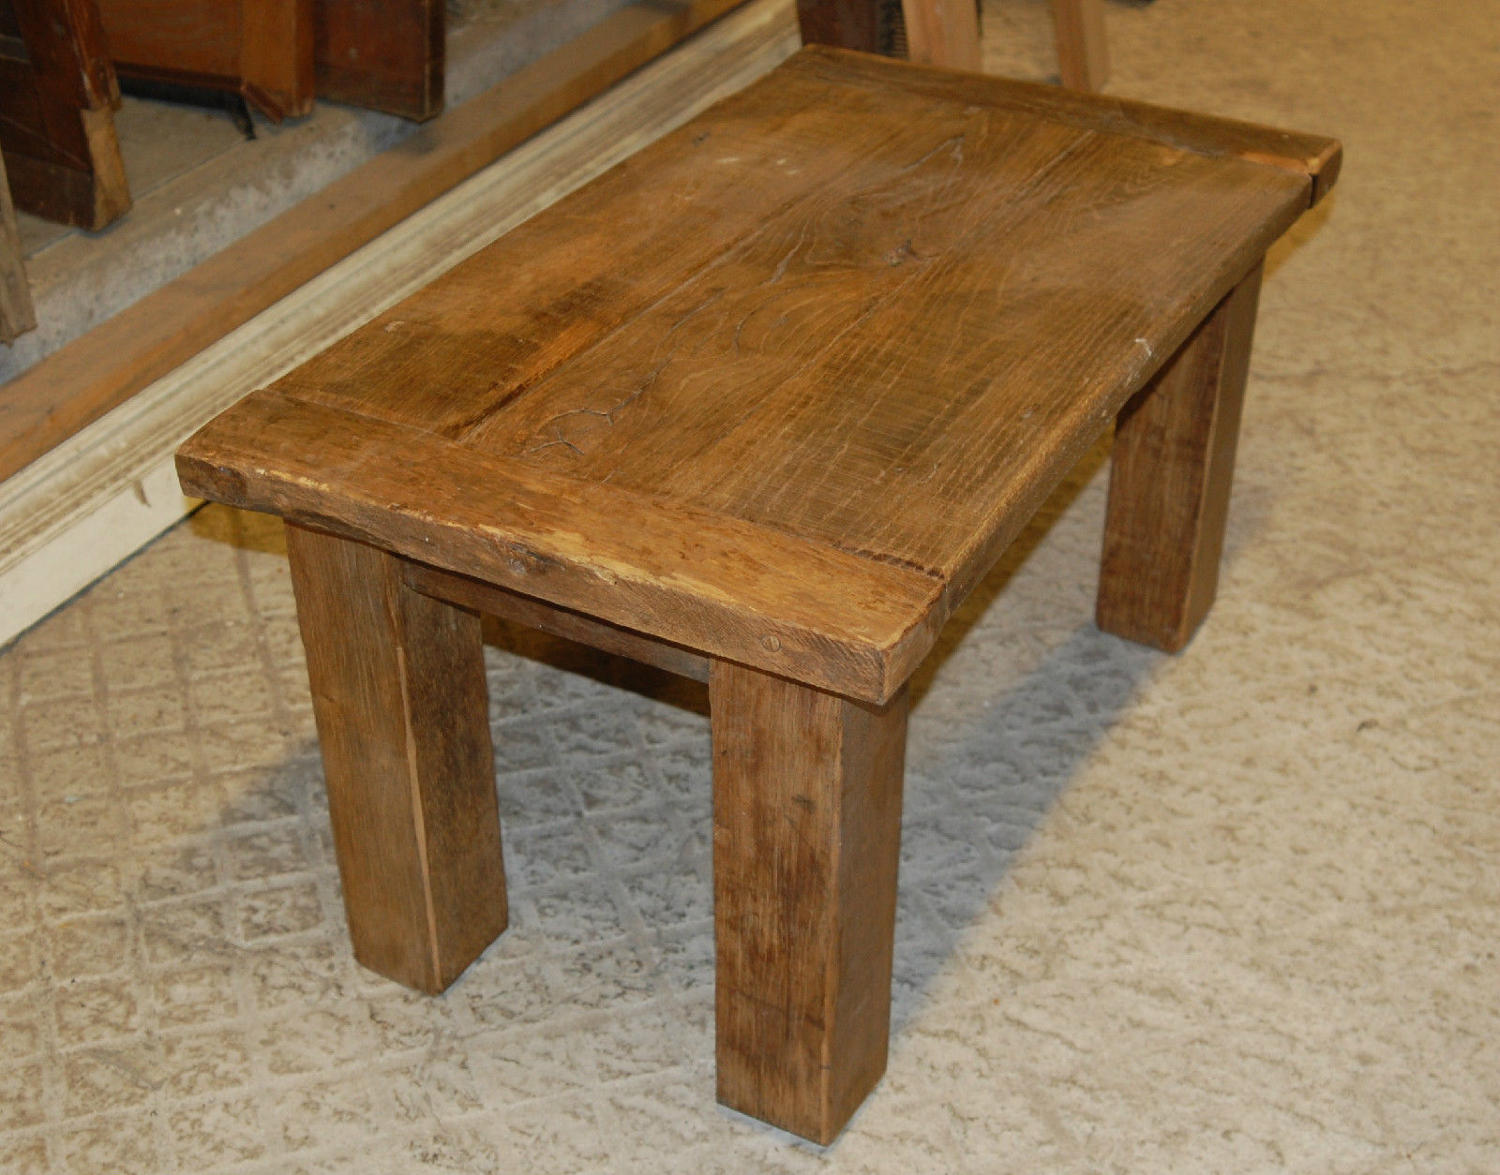 A Heavy Rustic Country Style Reclaimed Oak Coffee Table ref 881